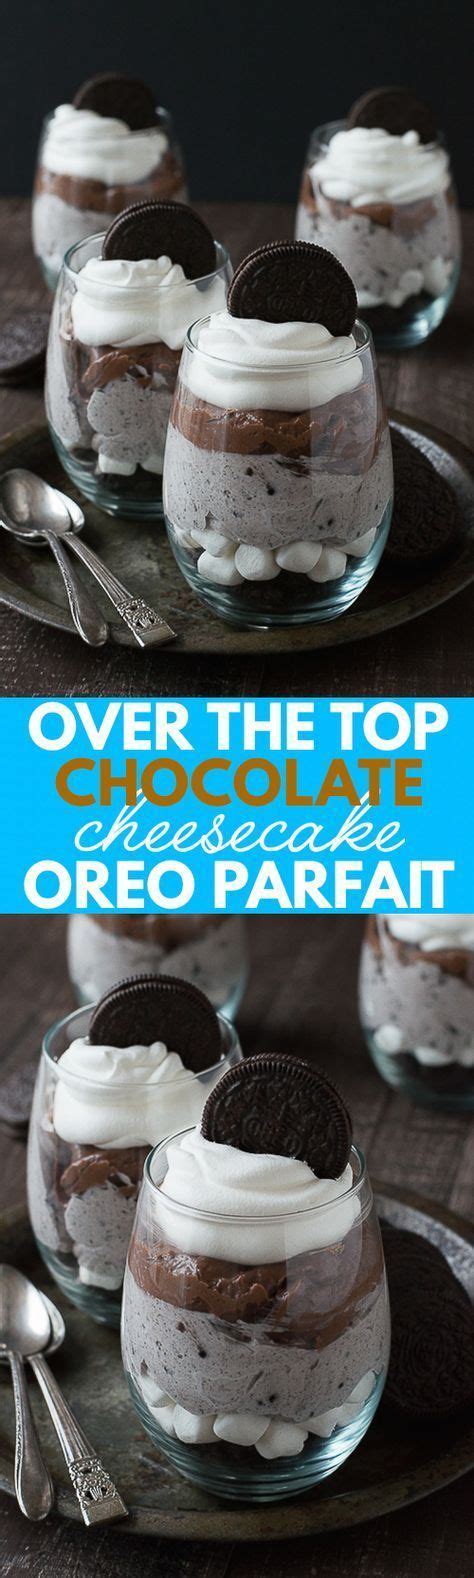 This oreo parfait has the perfect crunch of oreo crust and the gooey oreo whipped cream with a thick chocolate ganache. Over the Top Chocolate Cheesecake Oreo Parfaits - this is ...